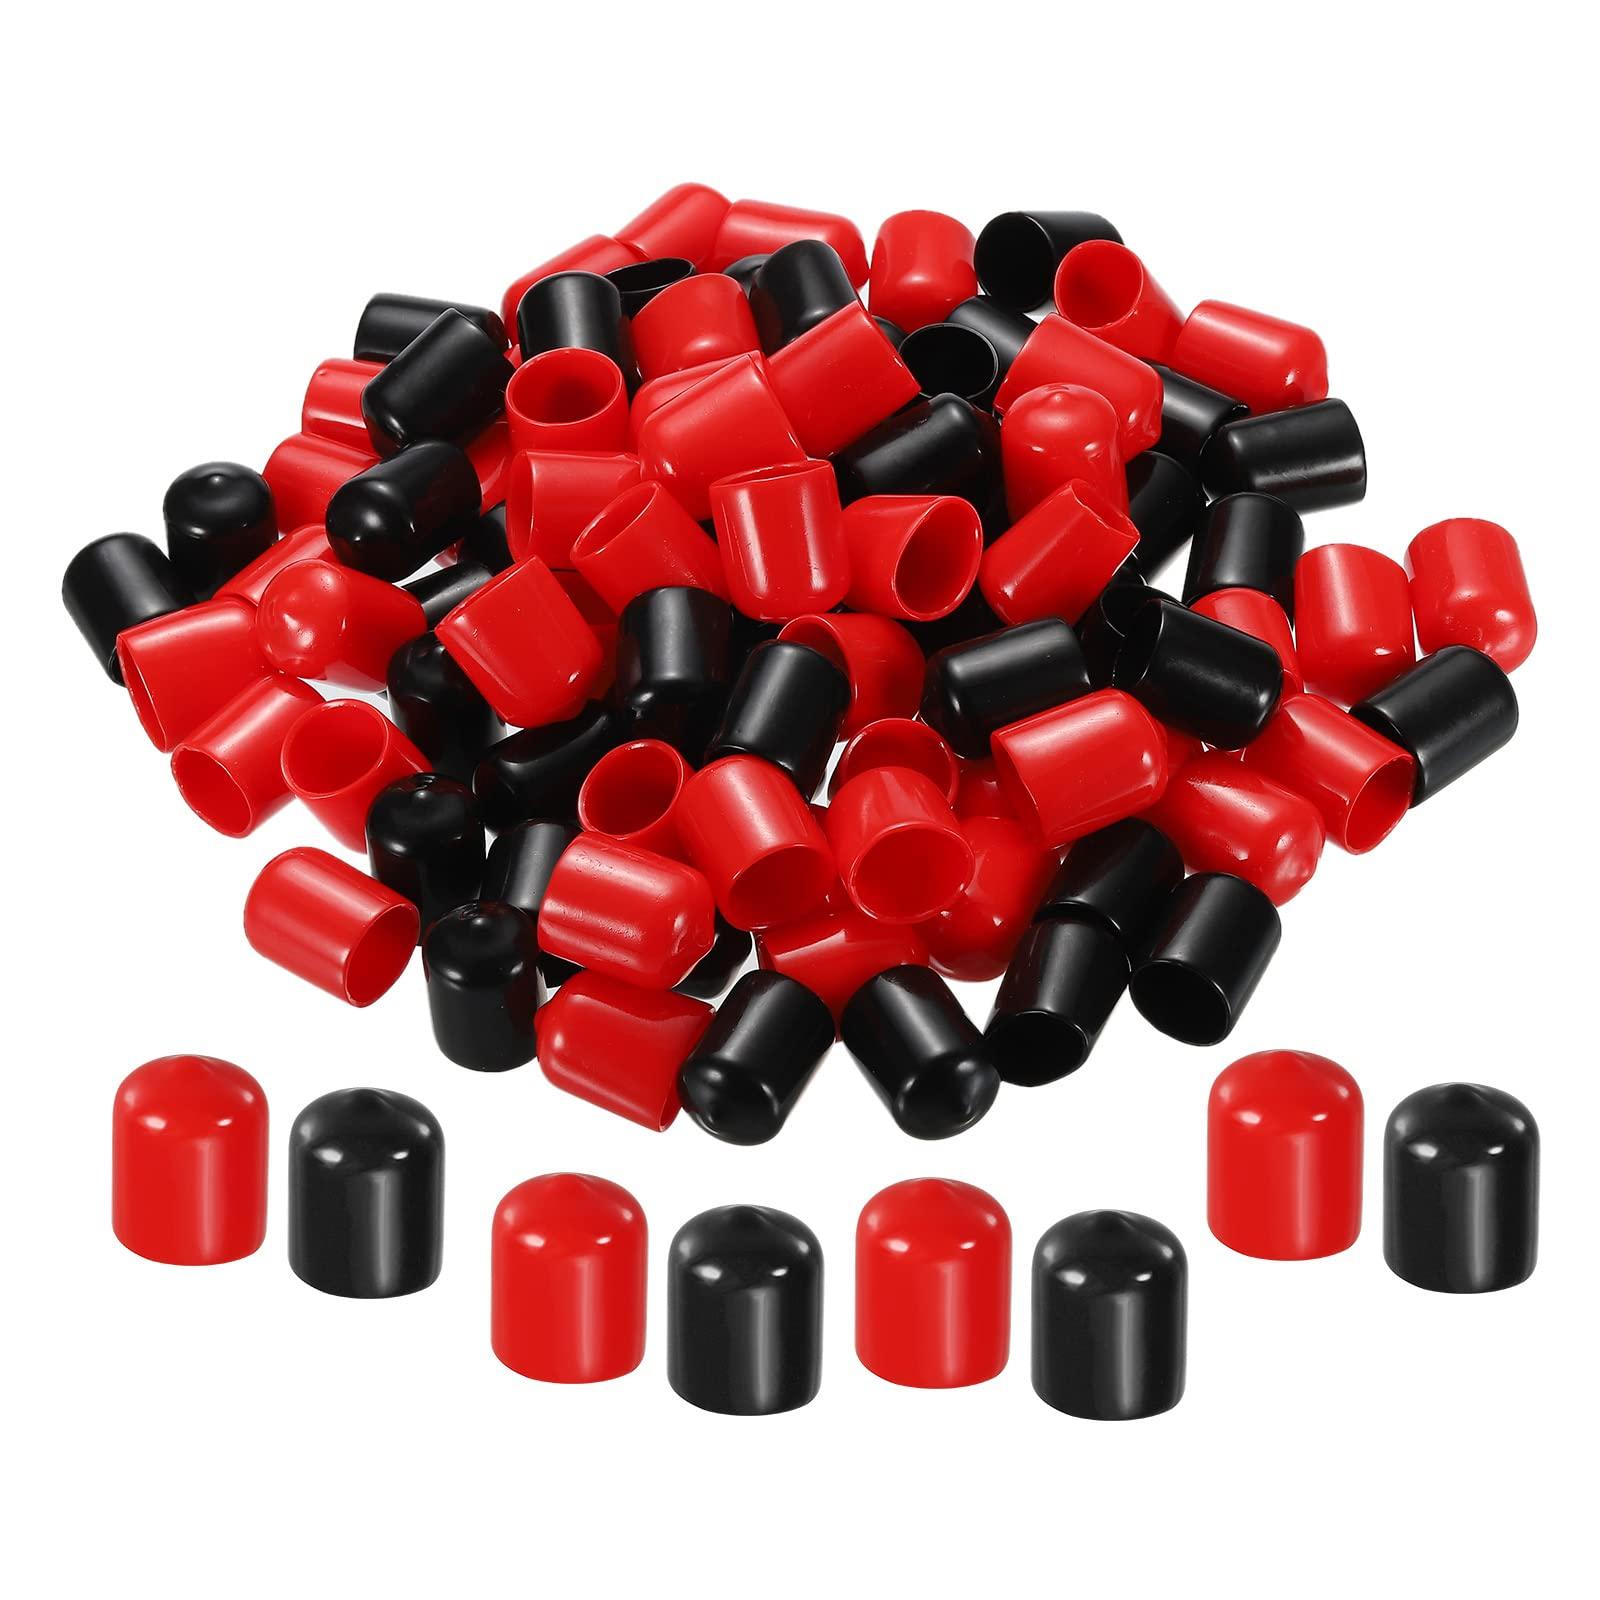 sourcing map 100pcs Rubber End Caps Cover Assortment 15mm PVC Vinyl Screw Thread Protector for Screw Bolt Black Red